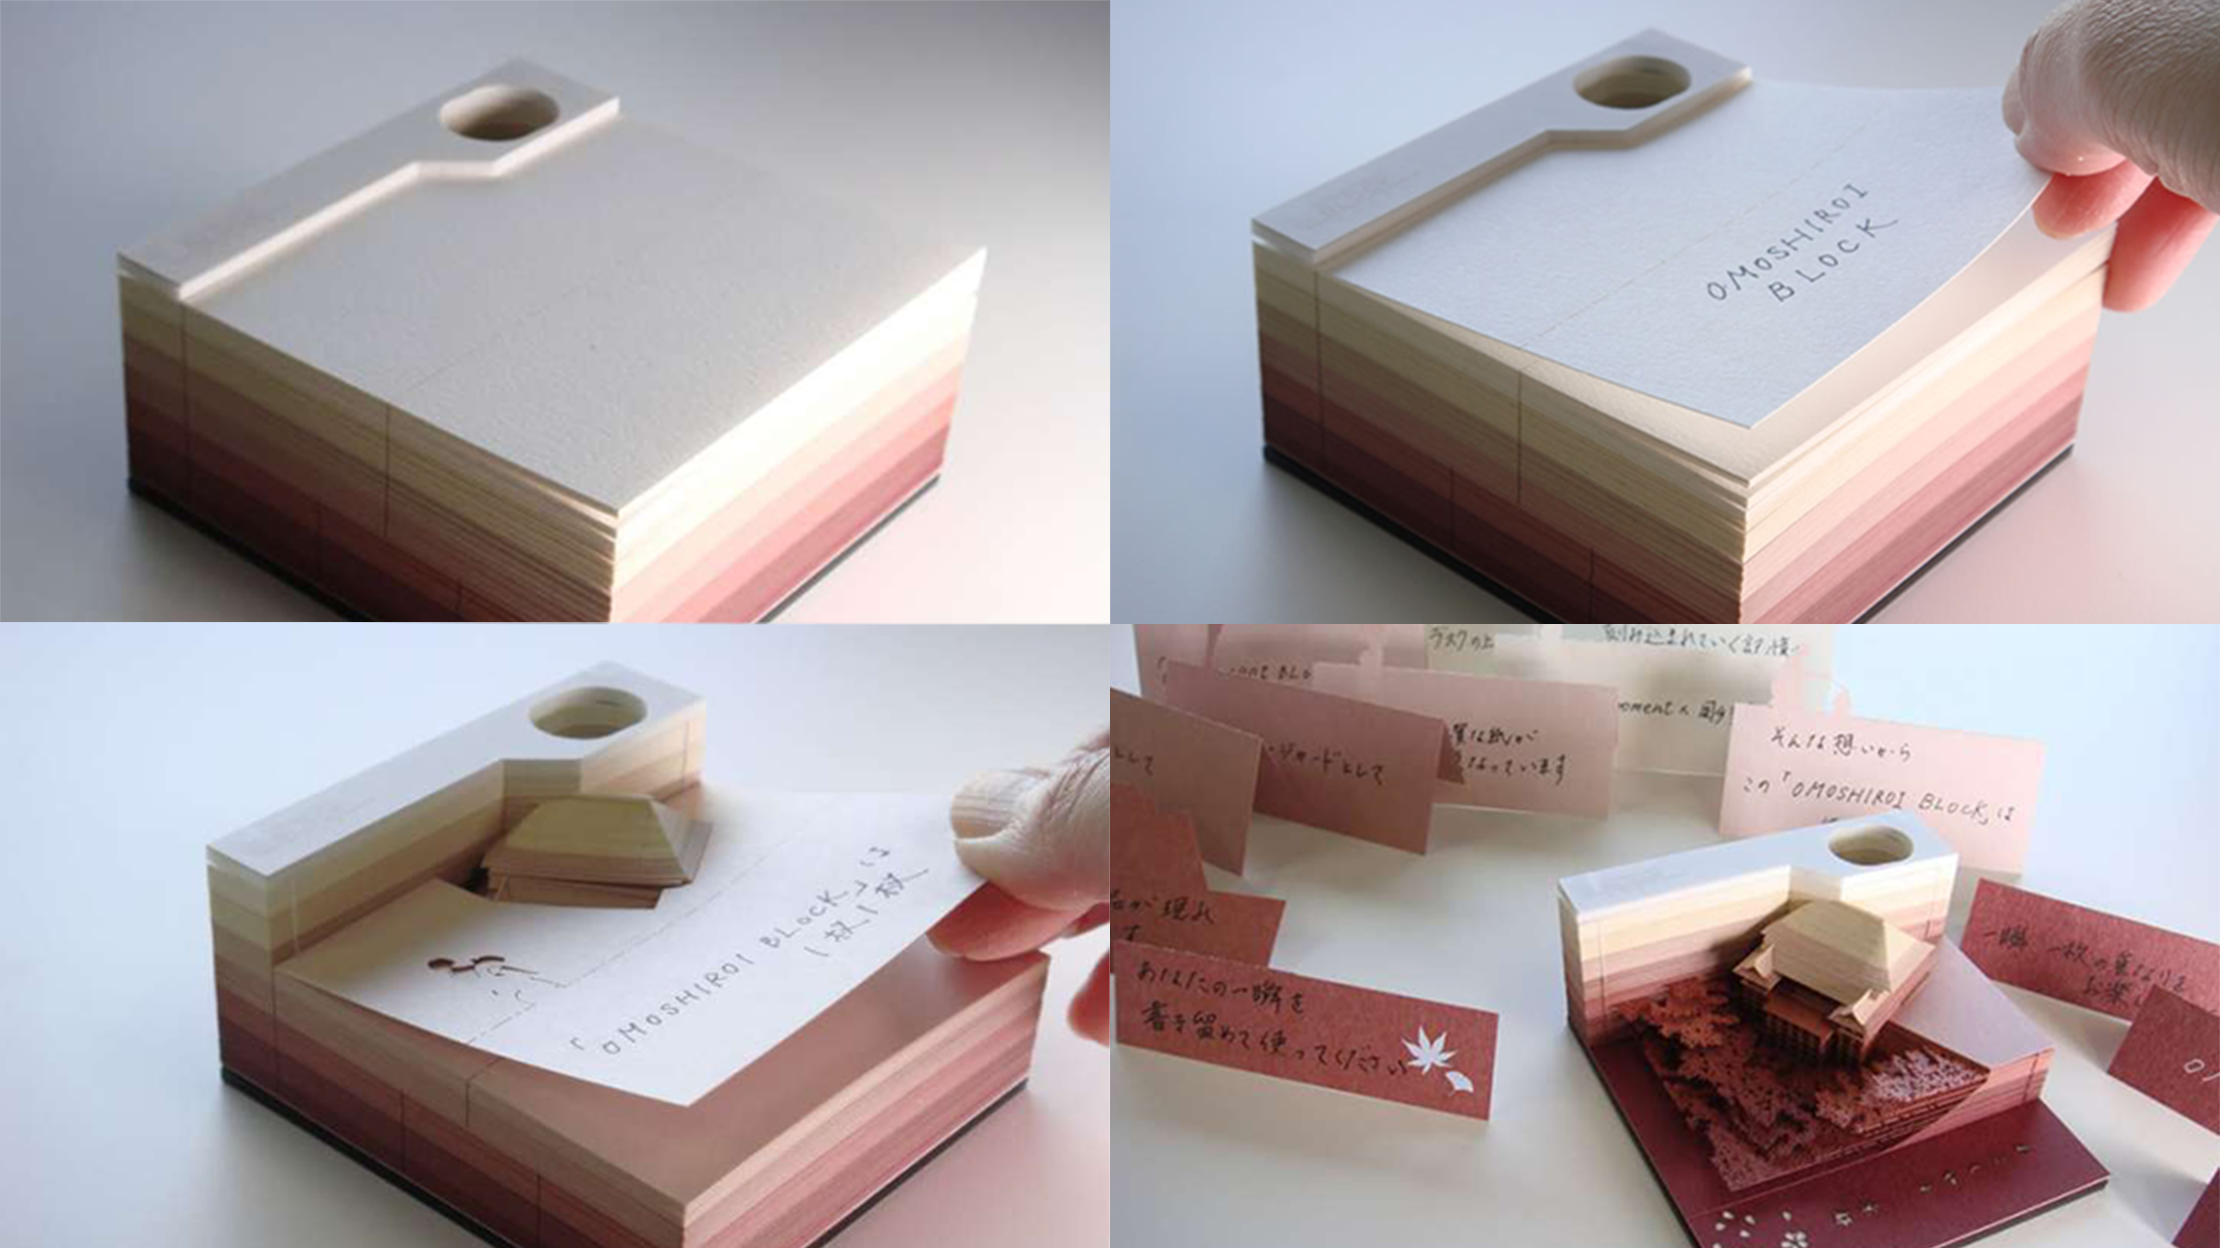 These Notepads Come With Intricate Paper Sculptures Hidden Inside Mental Floss